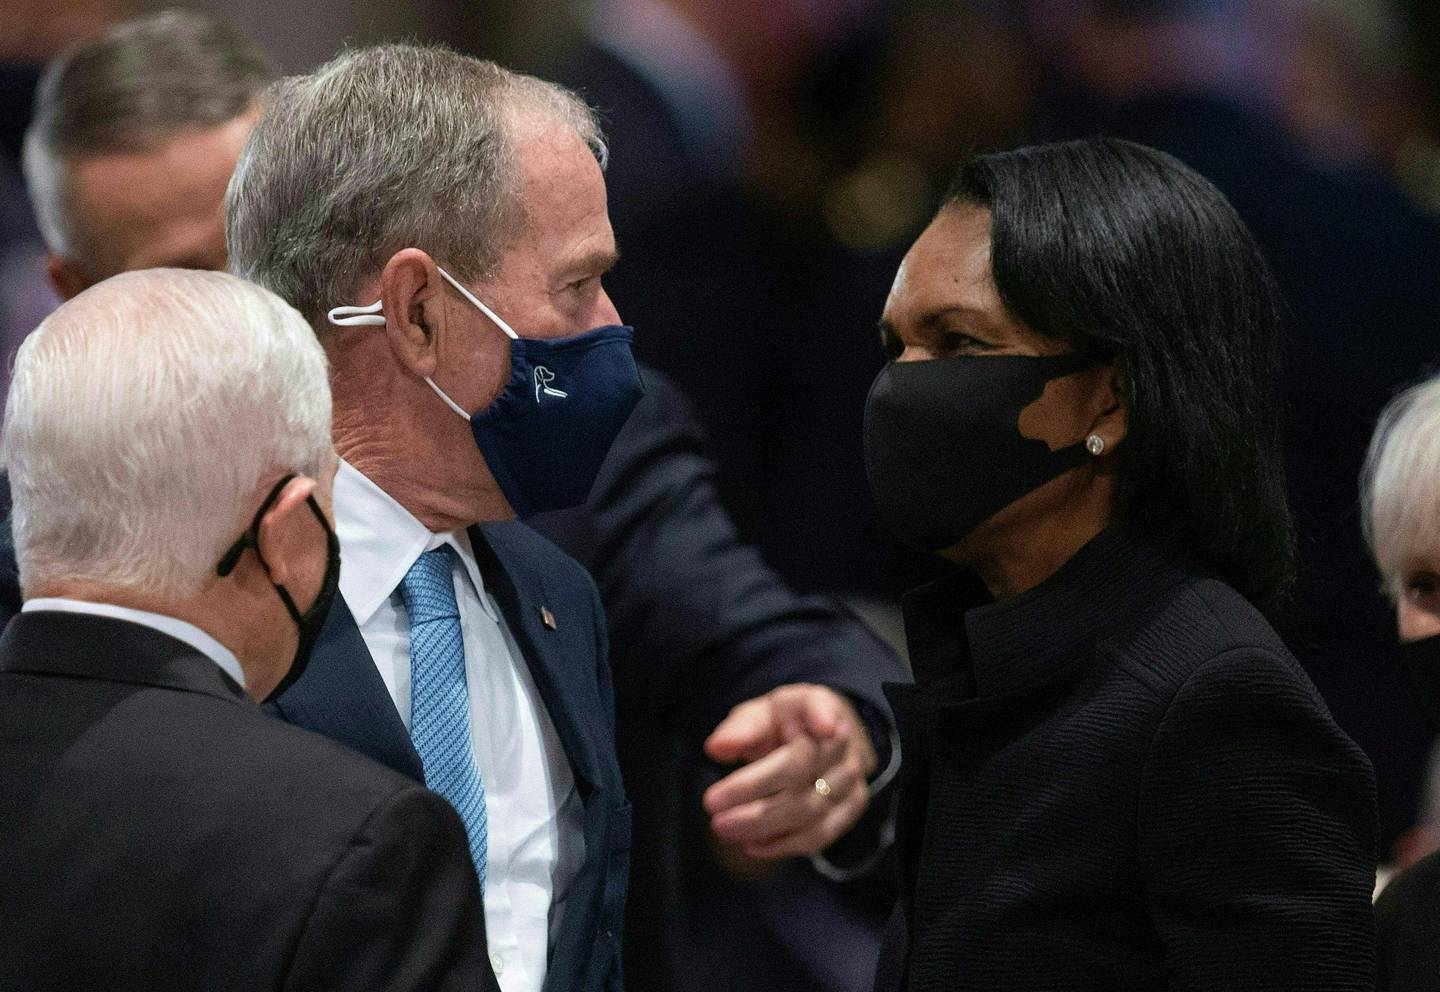 Former President George W Bush and former US Secretary of State Condolezza Rice attend the funeral of former Secretary of State Colin Powell, in Washington, DC on November 5, 2021. AFP